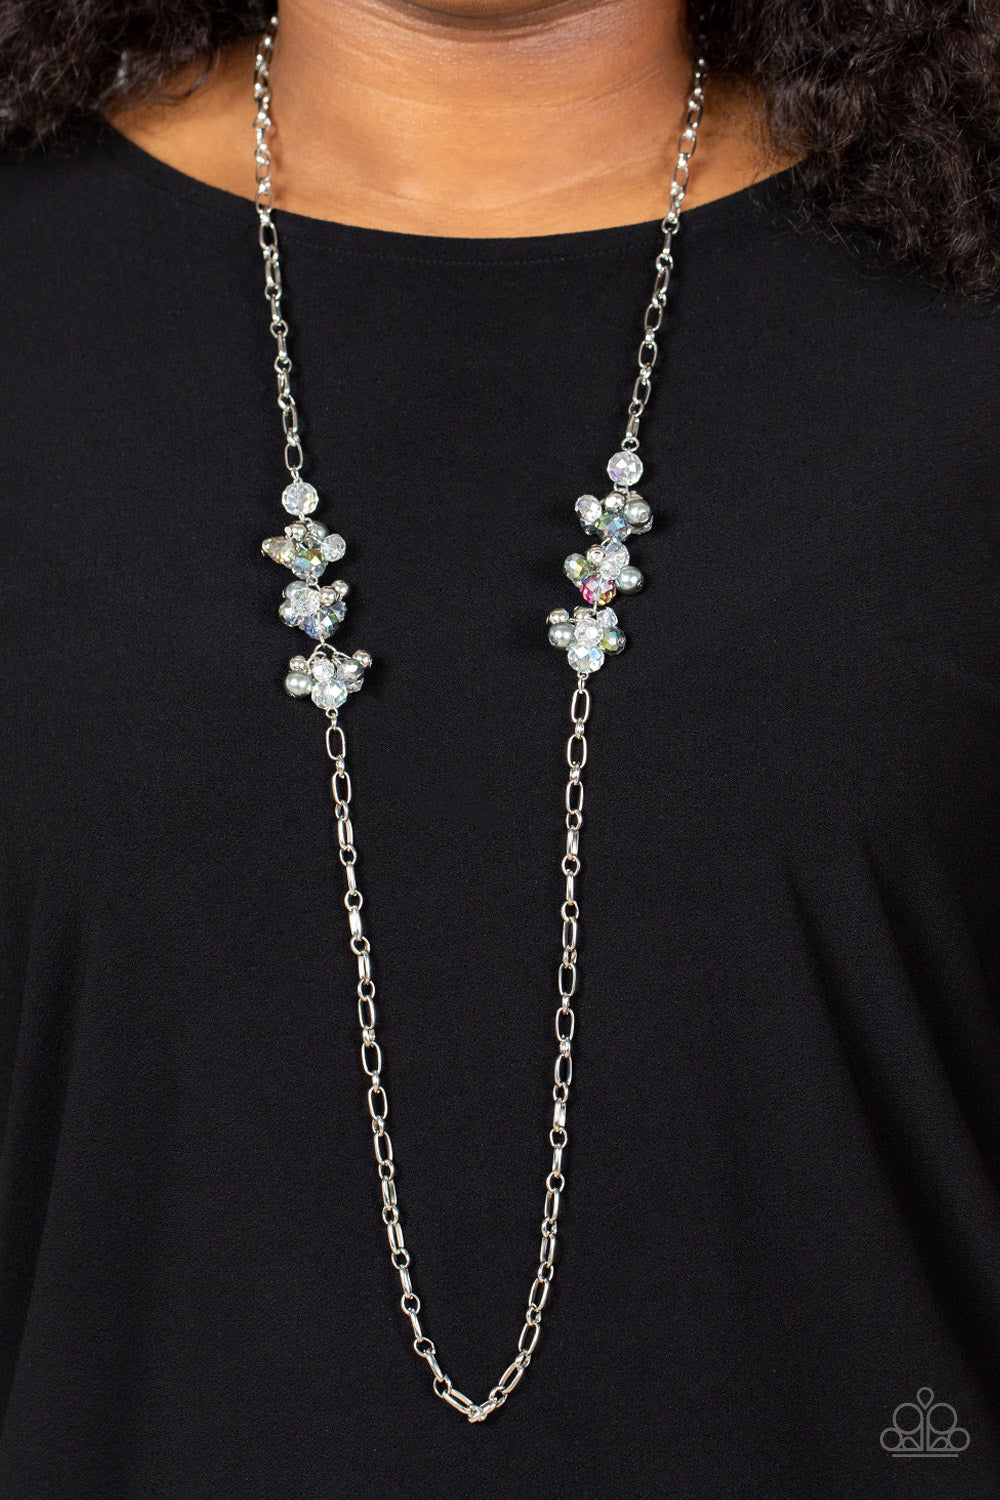 Poshly Parisian - Silver Pearly, Classic, & Iridescent Bead Cluster Paparazzi Necklace & matching earrings